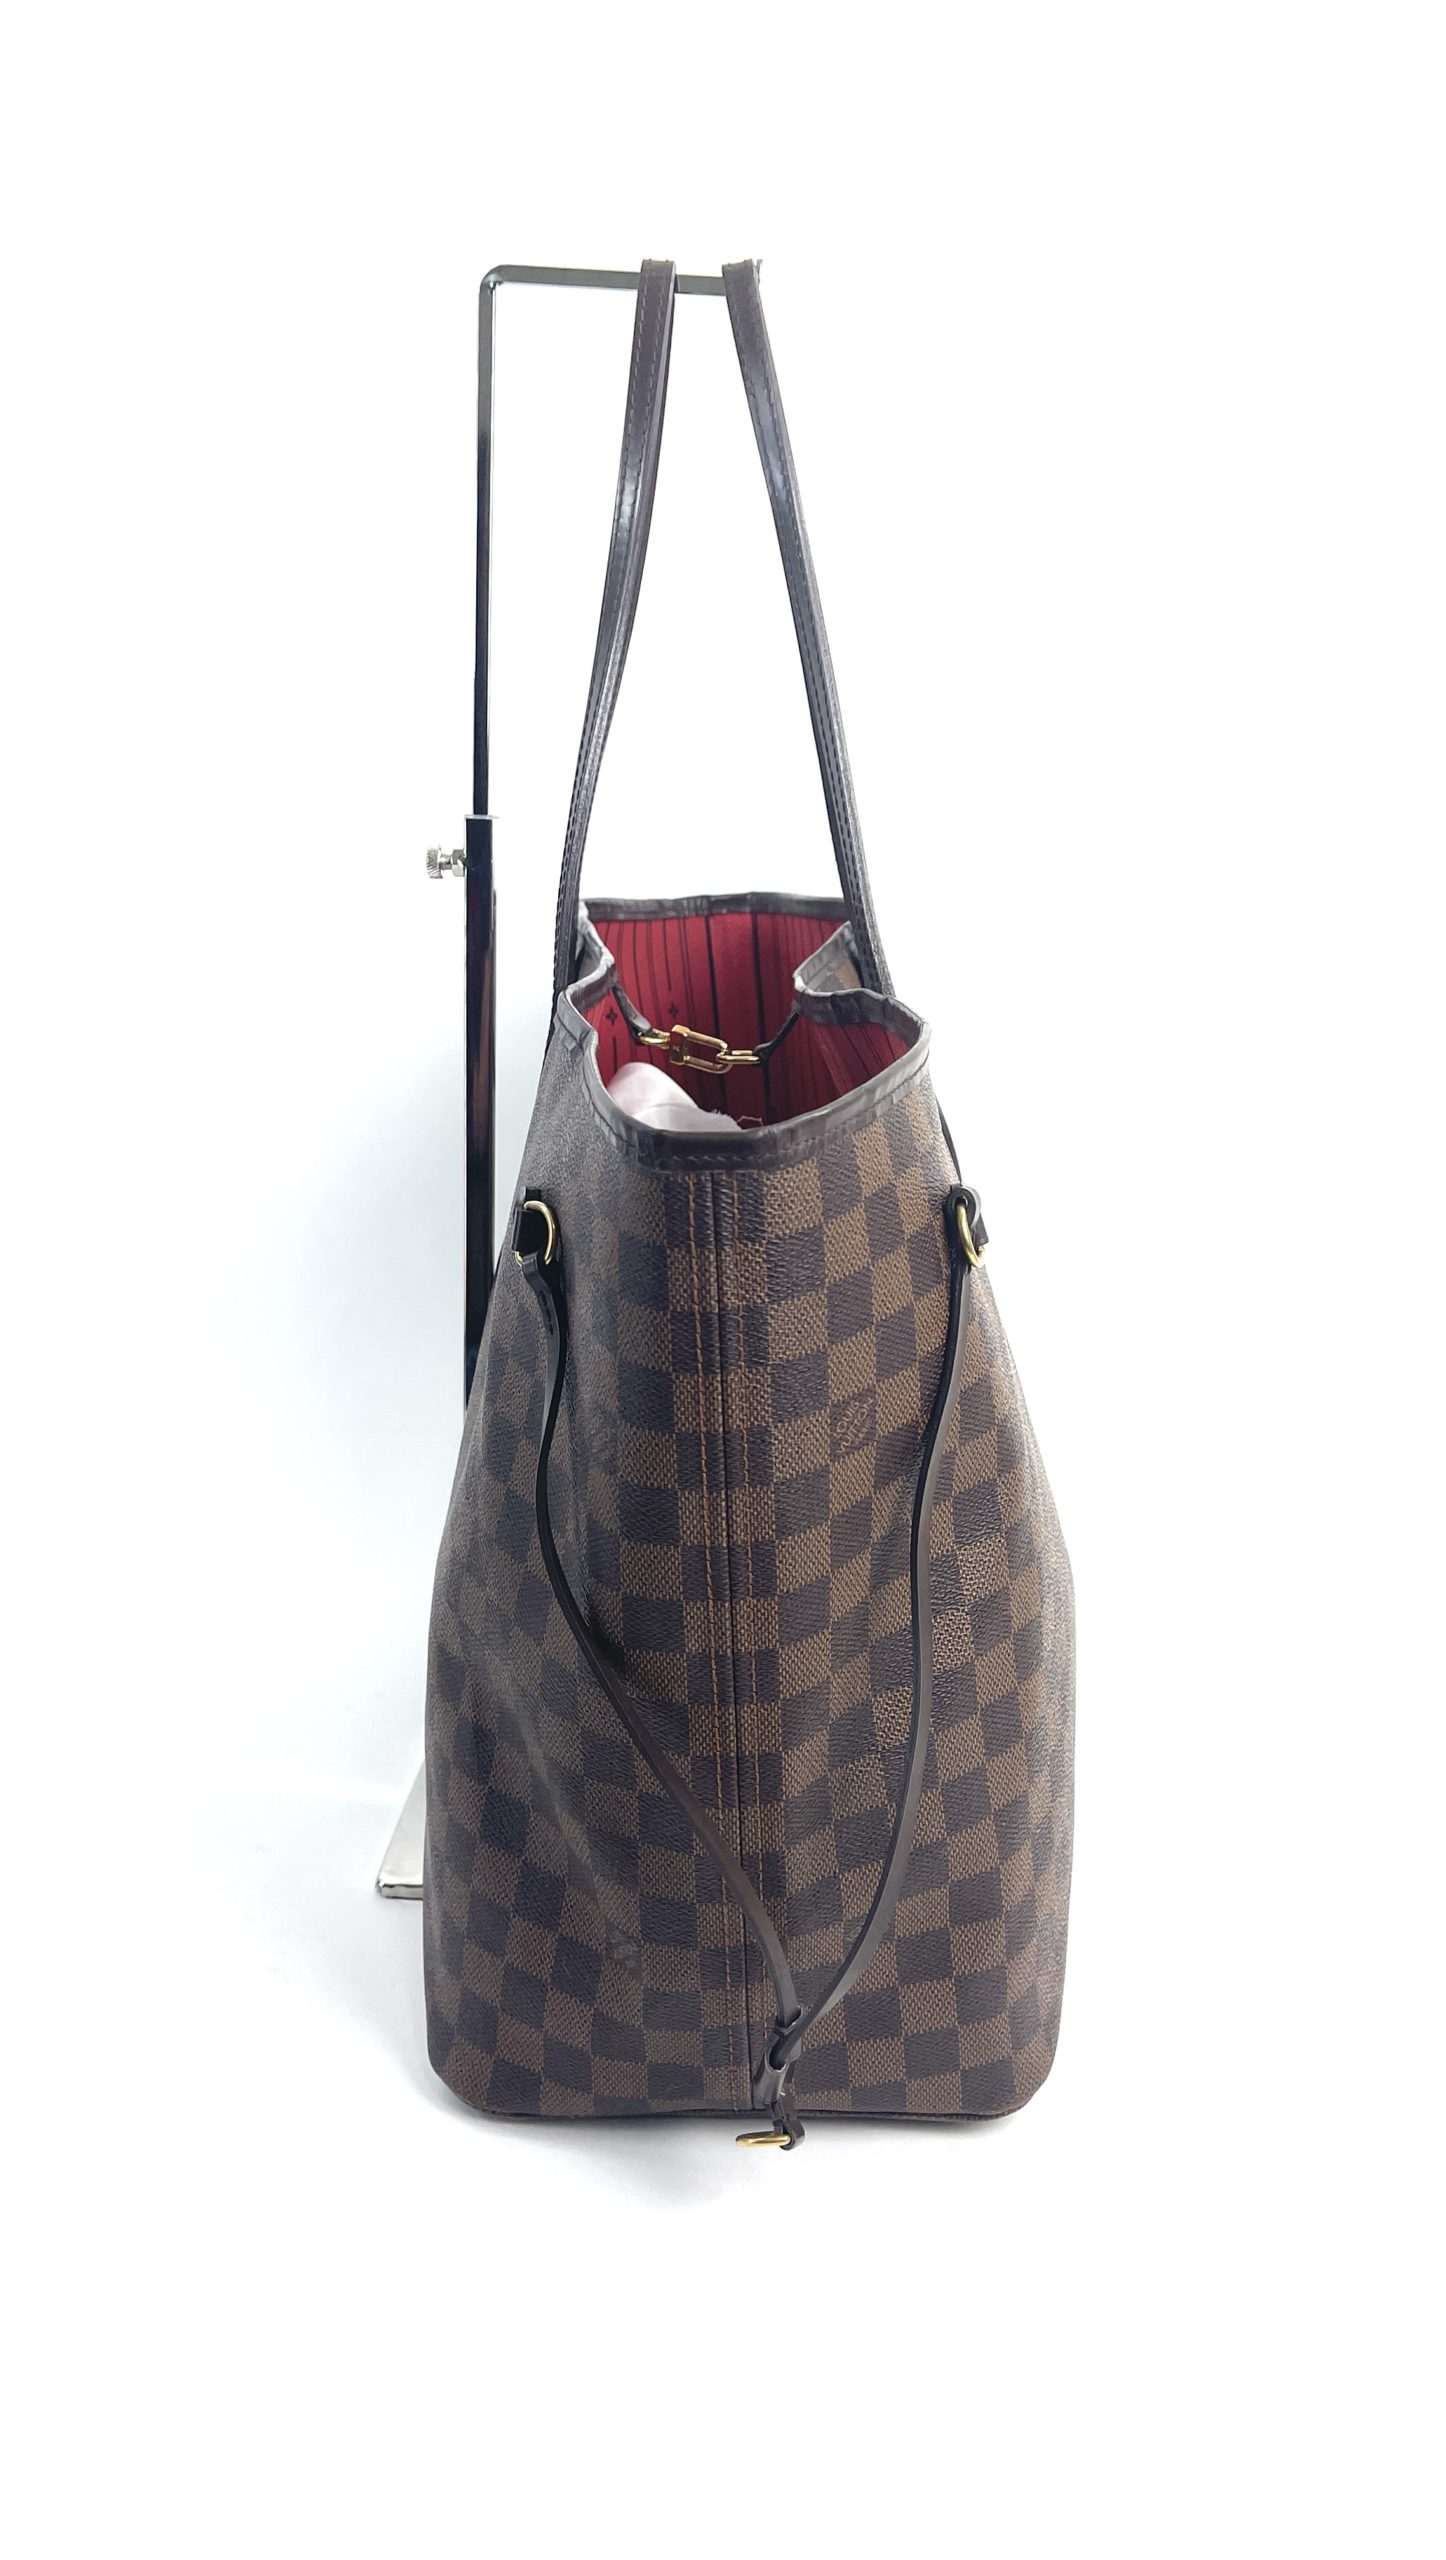 Louis Vuitton Neverfull GM available, price: 3800 zł (~831 euro